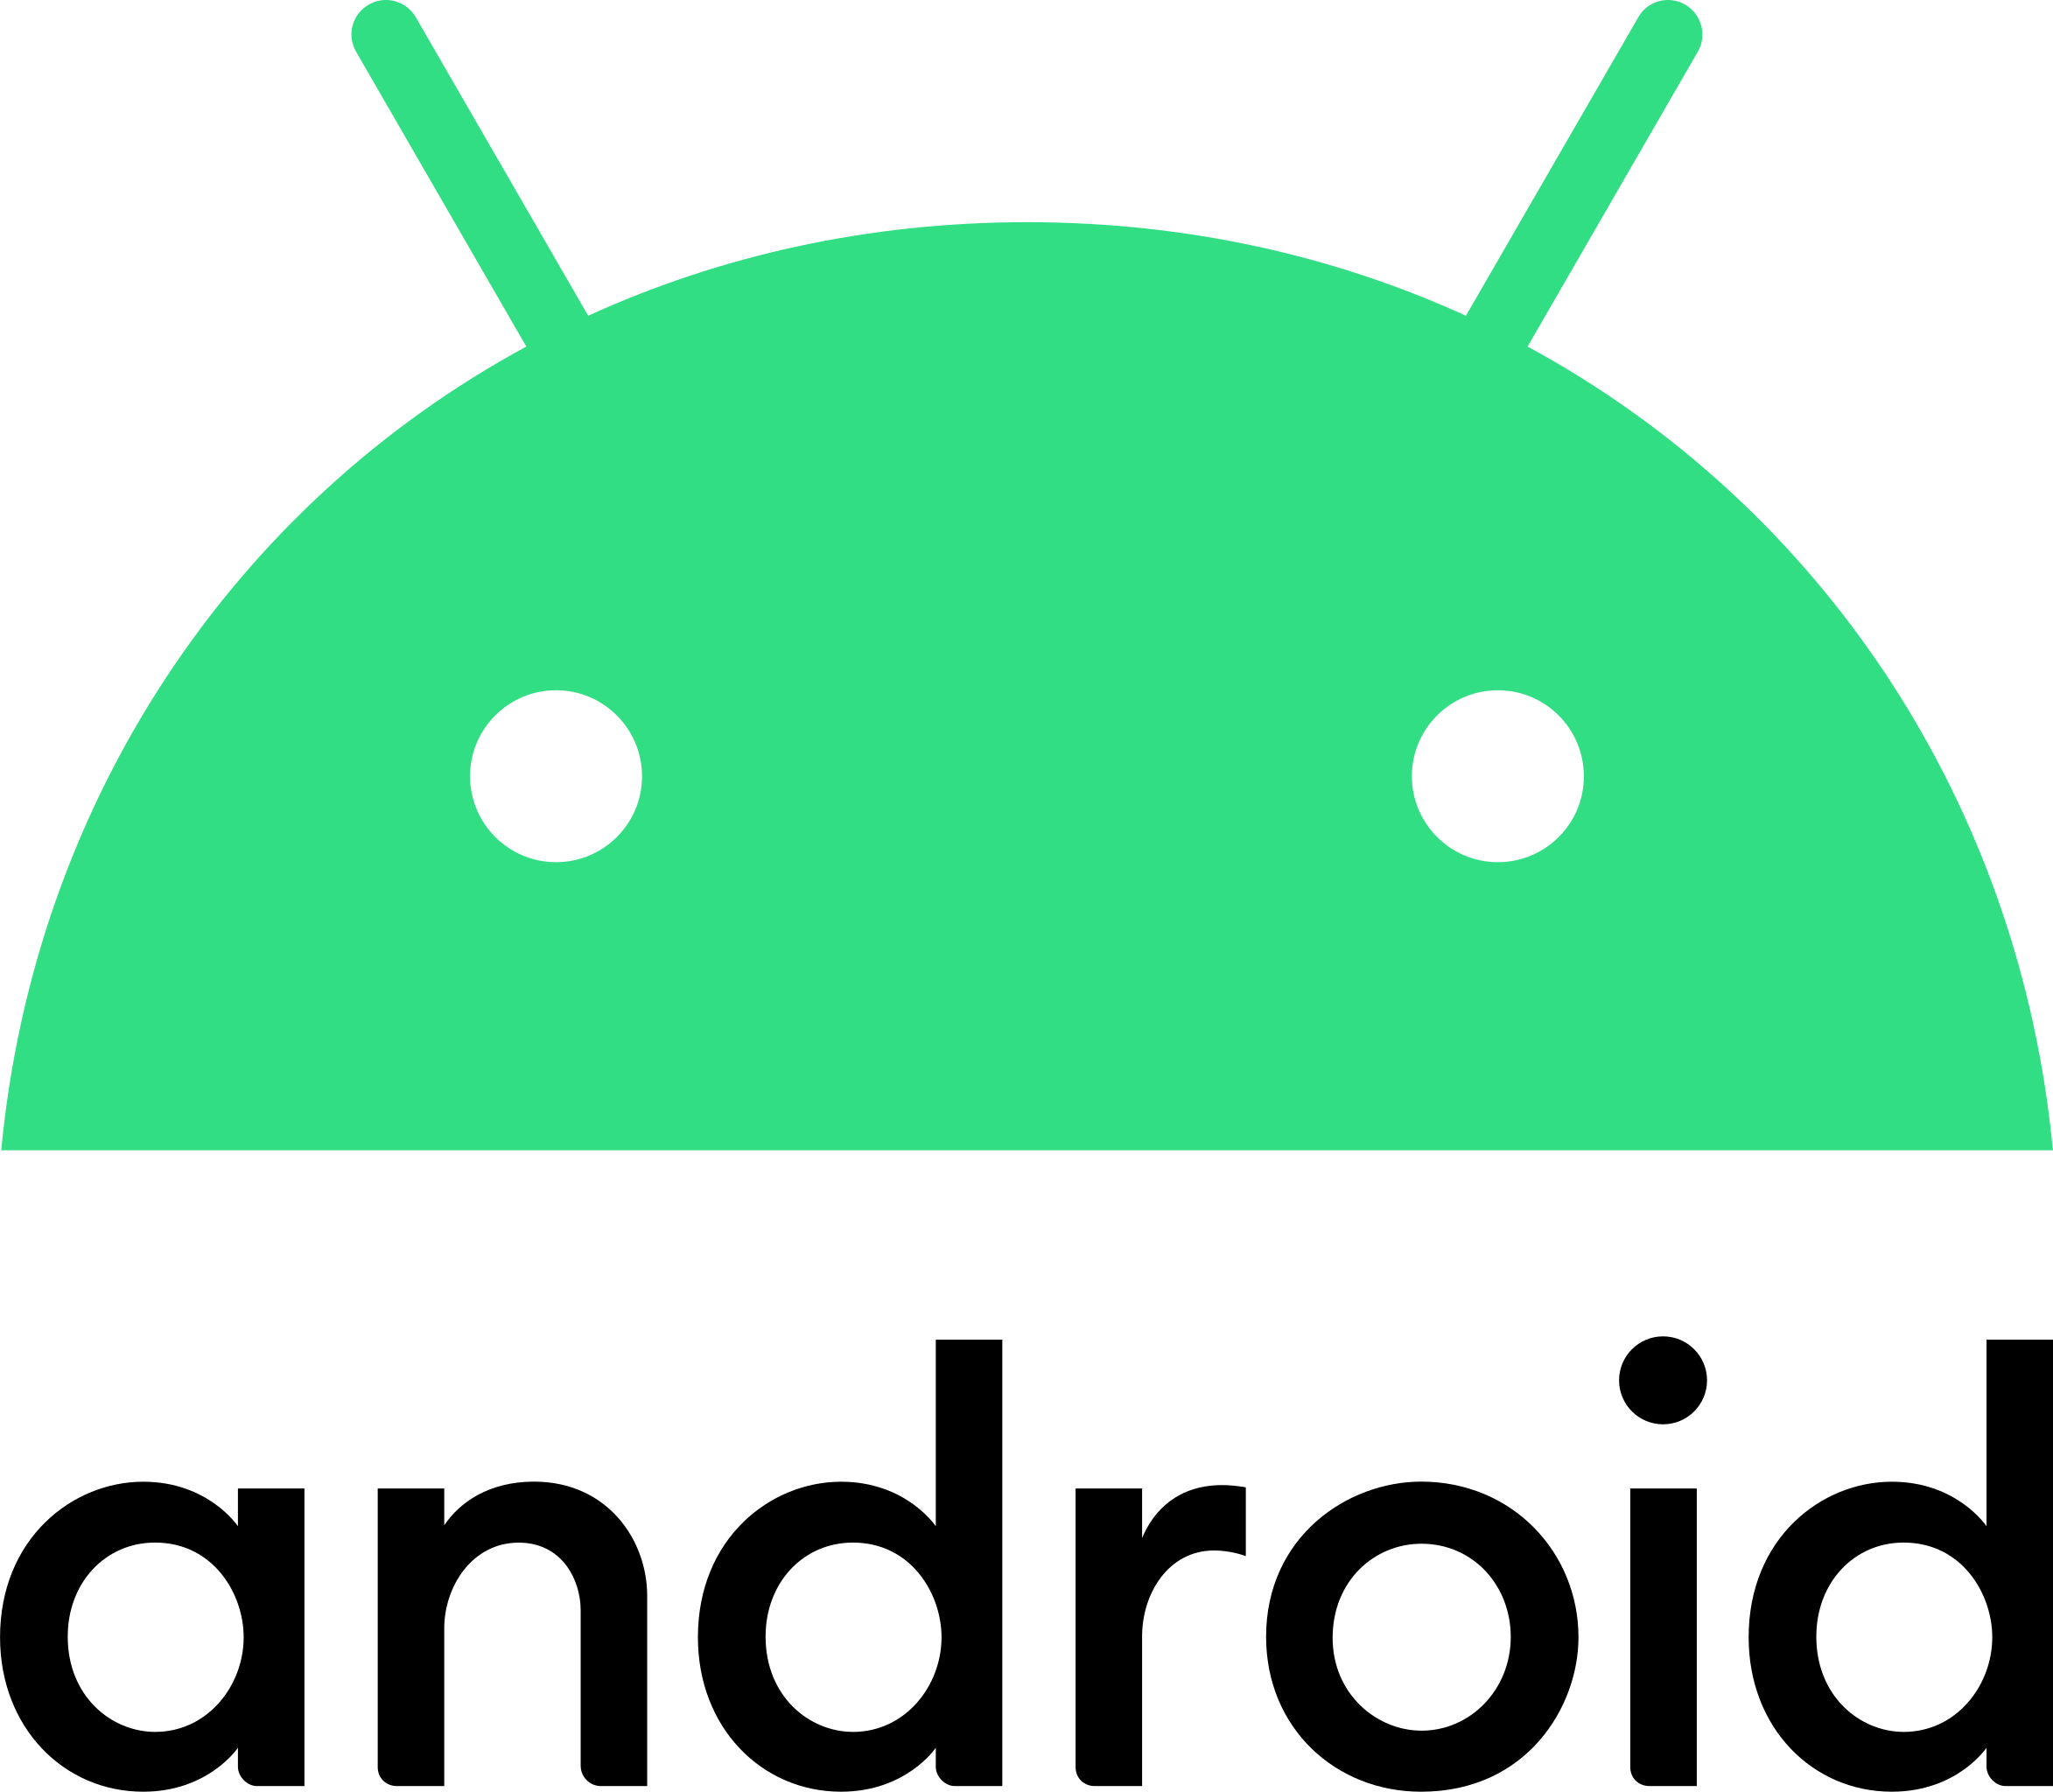 Android app for BLE communication